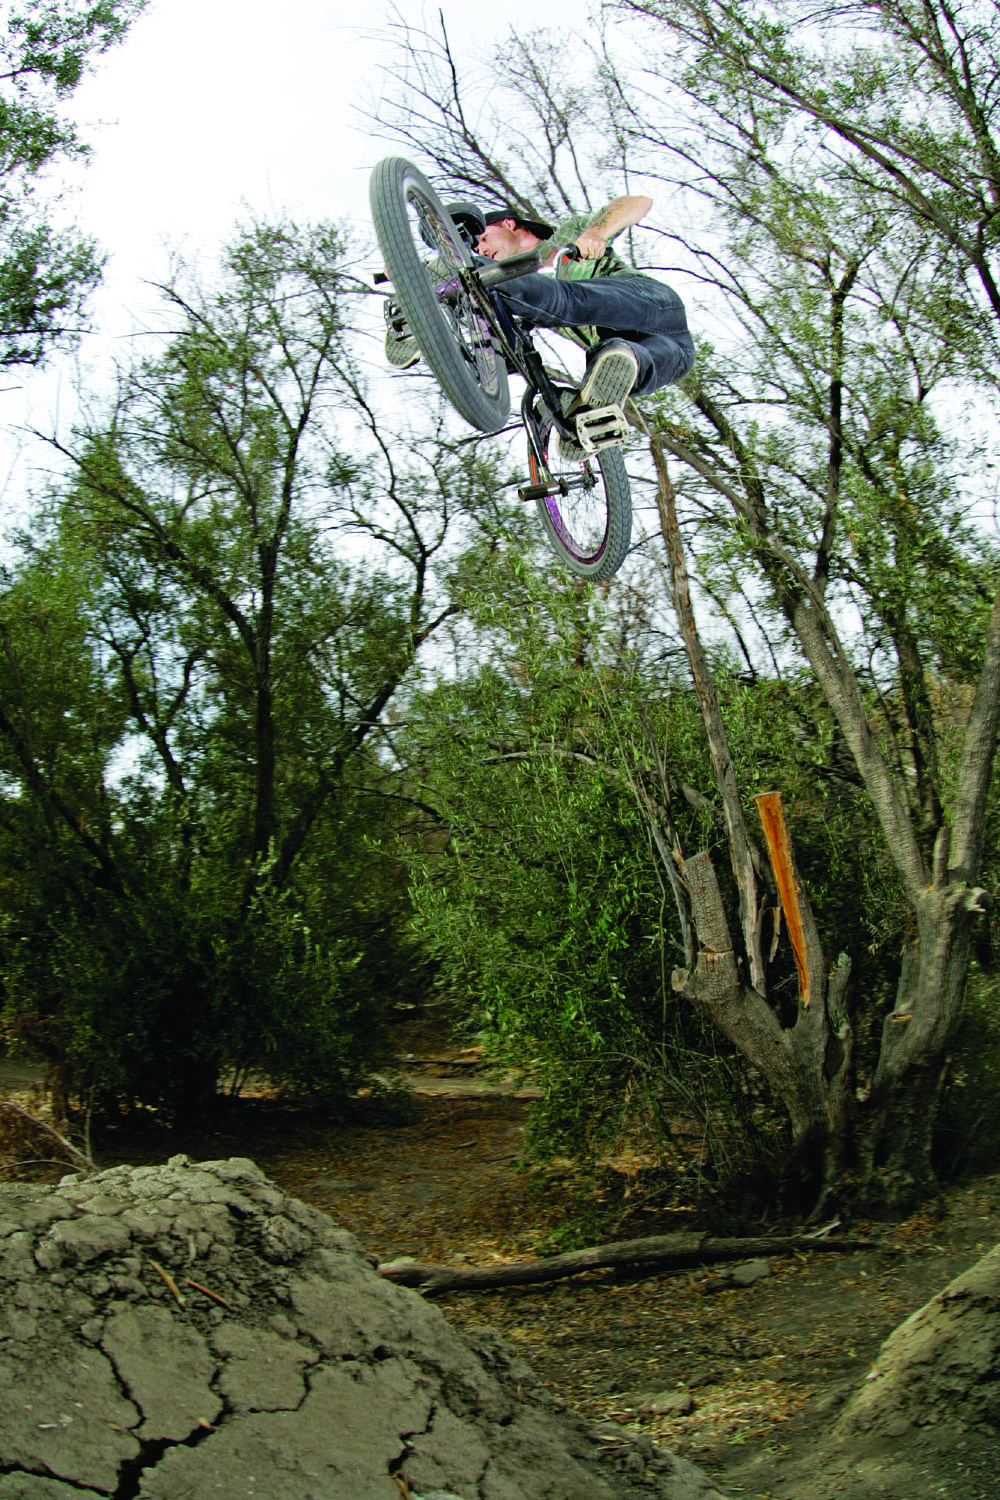 Print of photo that ran in December 2014 issue of BMX Plus Magazine.